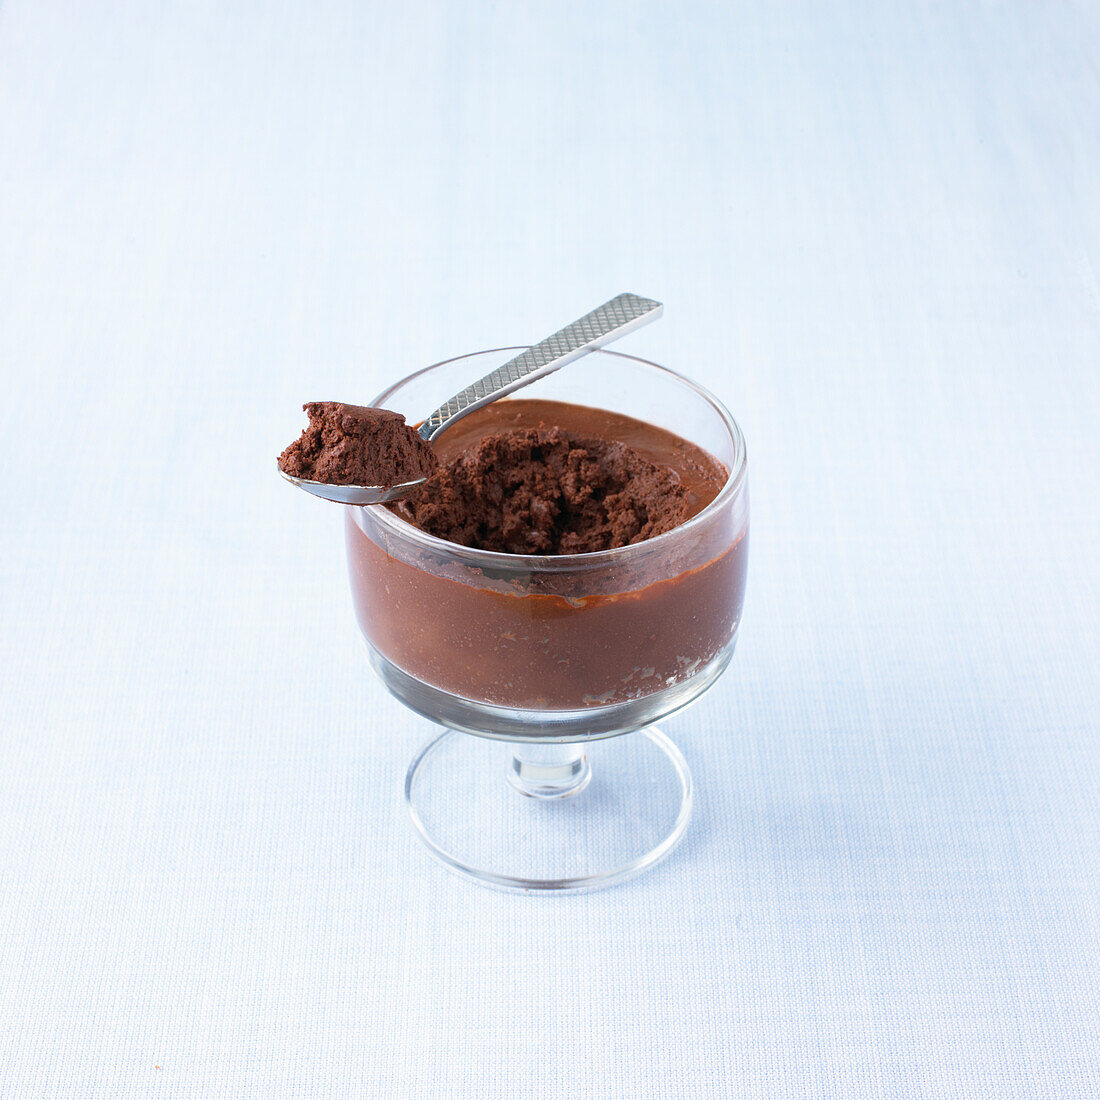 Glass of chocolate mousse